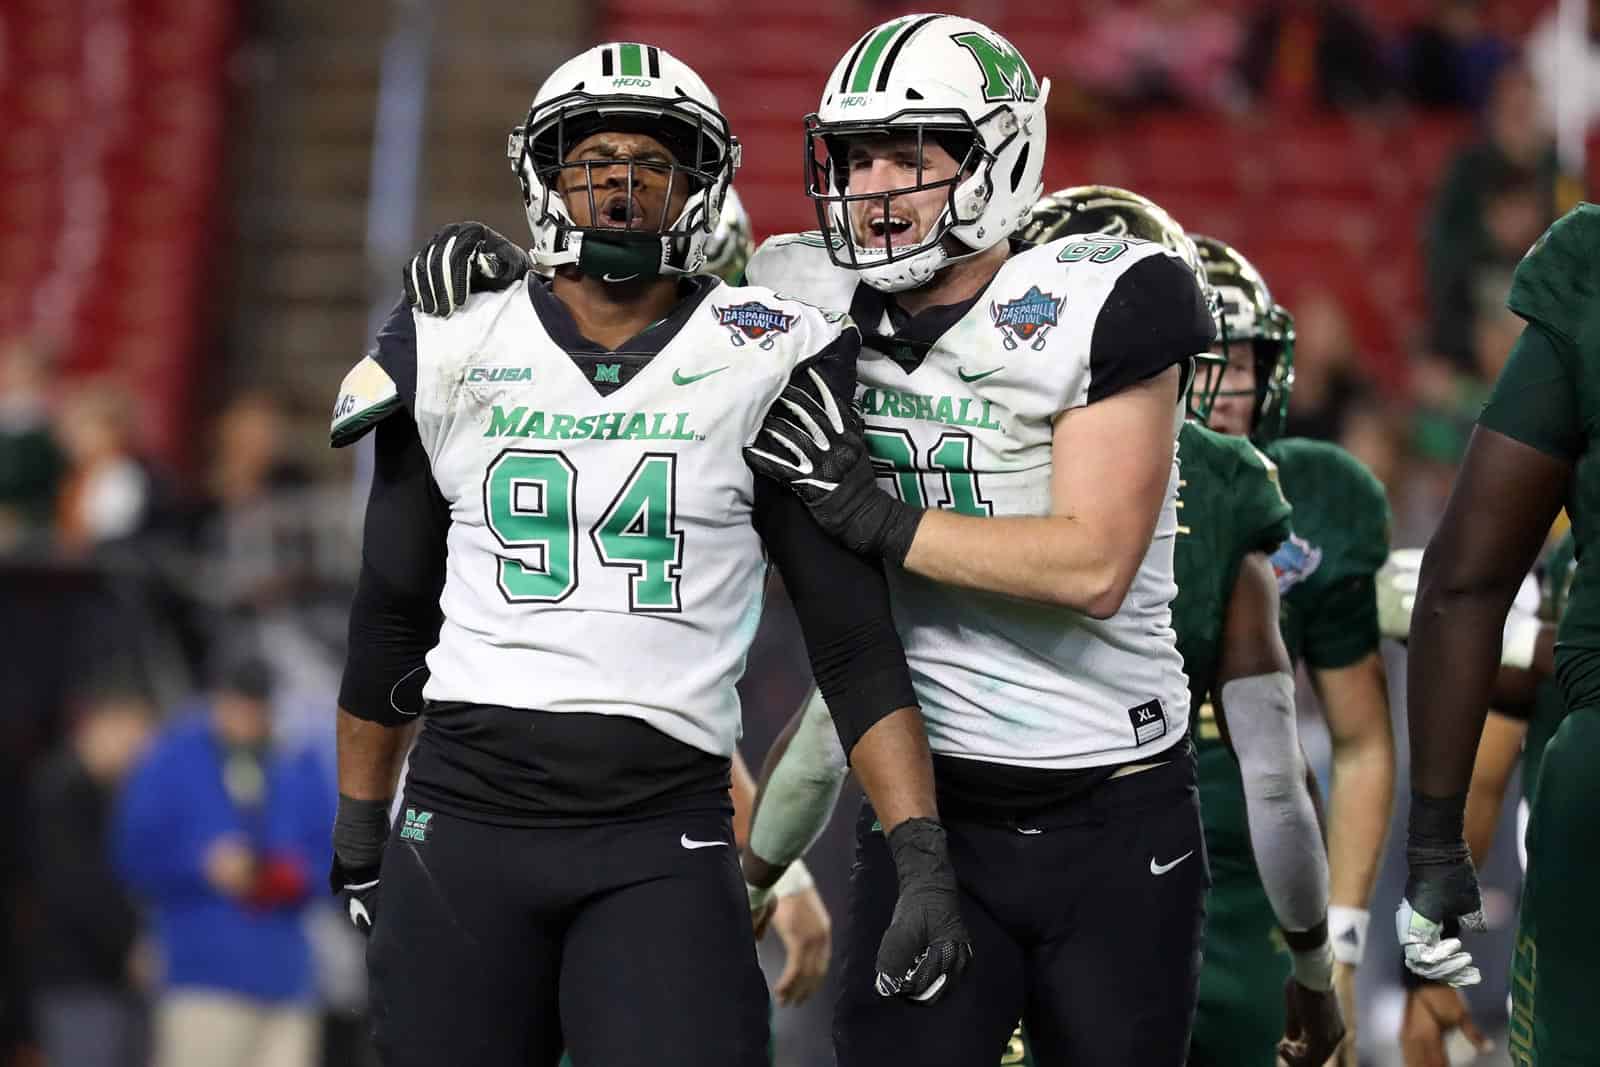 Marshall, Ohio schedule homeandhome football series for 2025, 2027